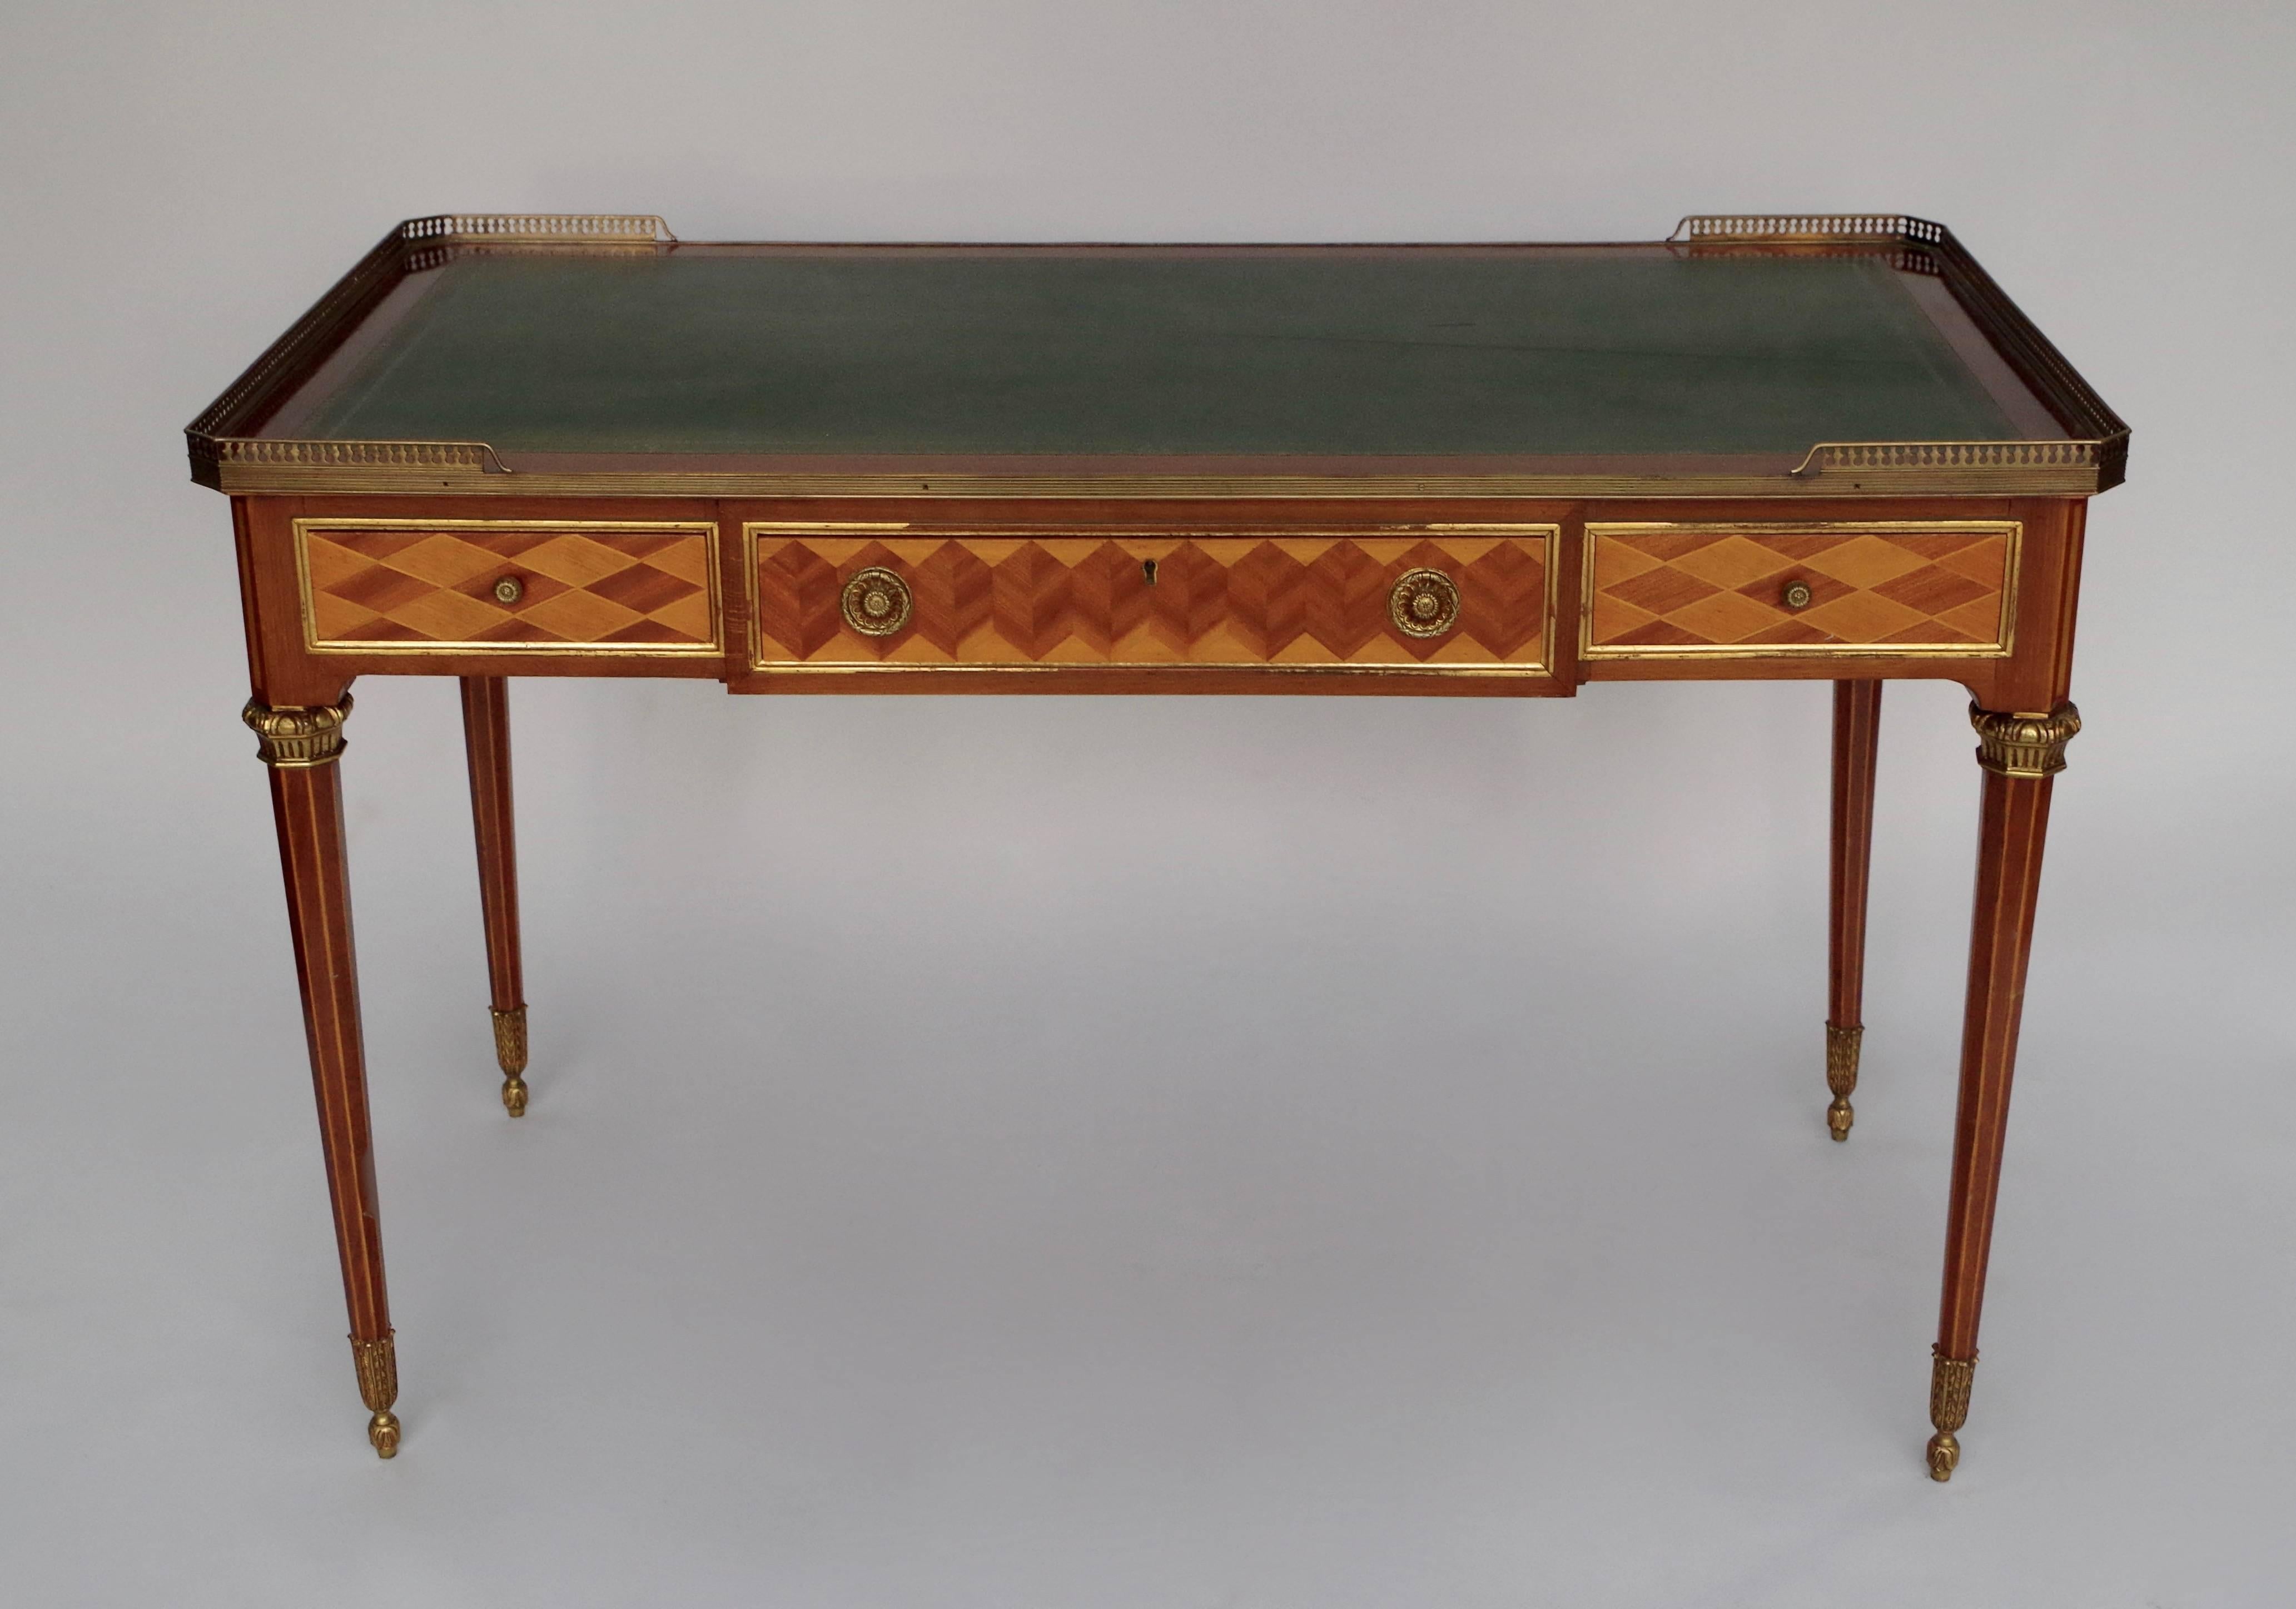 Louis XVI style salon table / flat desk in mahogany decorated with geometric marquetry in mahogany and satinwood with rafters patterns on the central drawers and diamonds patterns on the side drawers, framed with gilt wood molding.
Top in green